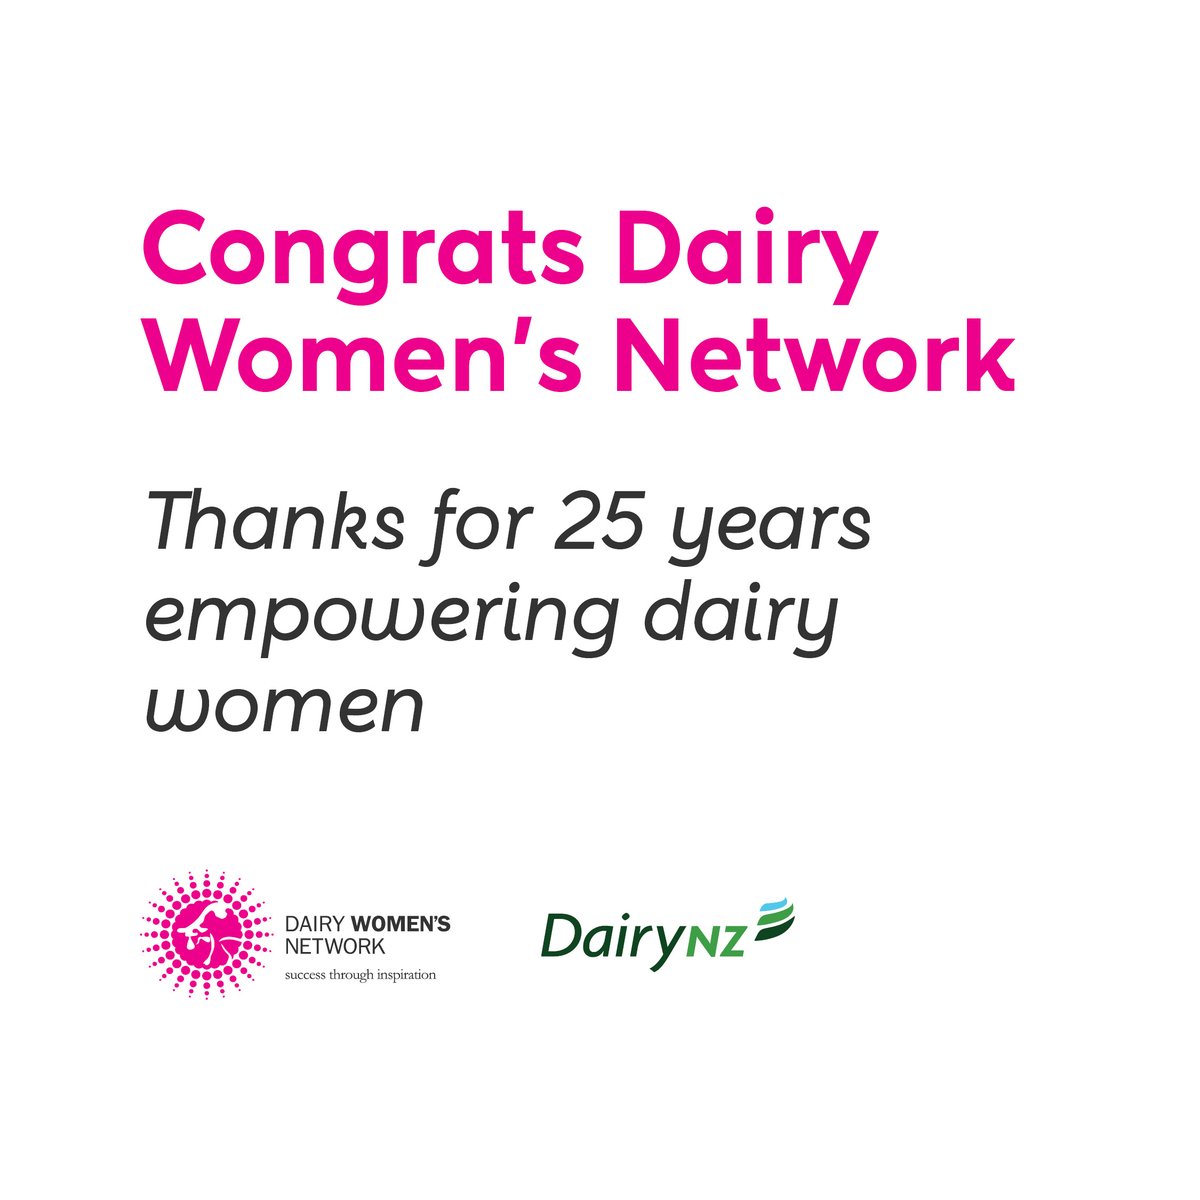 Congrats @dairy_women on 25 amazing years! It takes a collaborative effort to keep New Zealand dairy farming progressing. We’re proud to be working with Dairy Women’s Network from the beginning as a founding partner to help them empower women in our sector achieve great things!